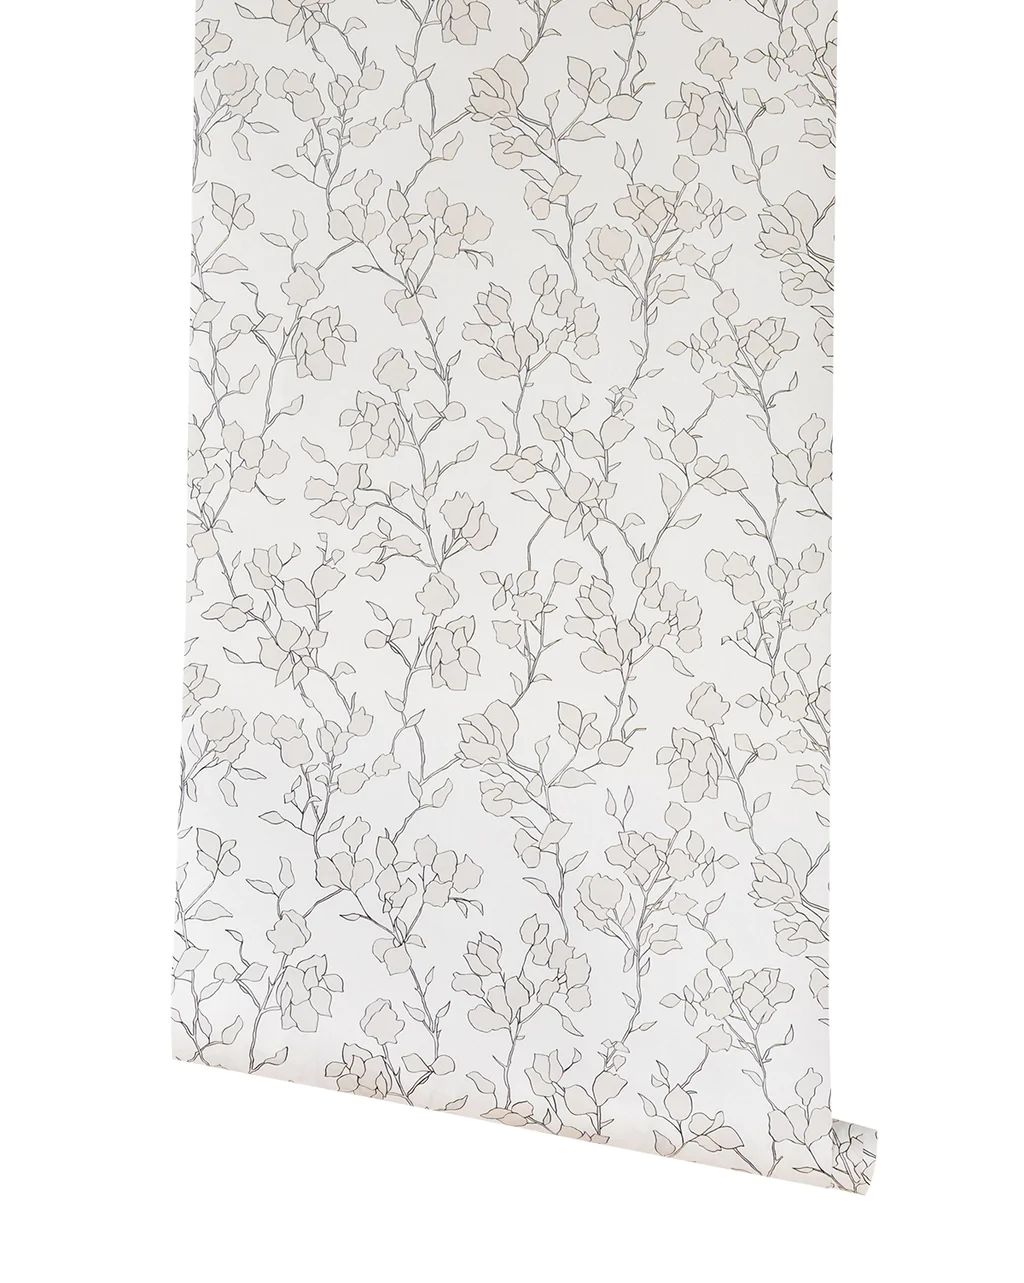 Blair Sketched Floral Wallpaper | McGee & Co.